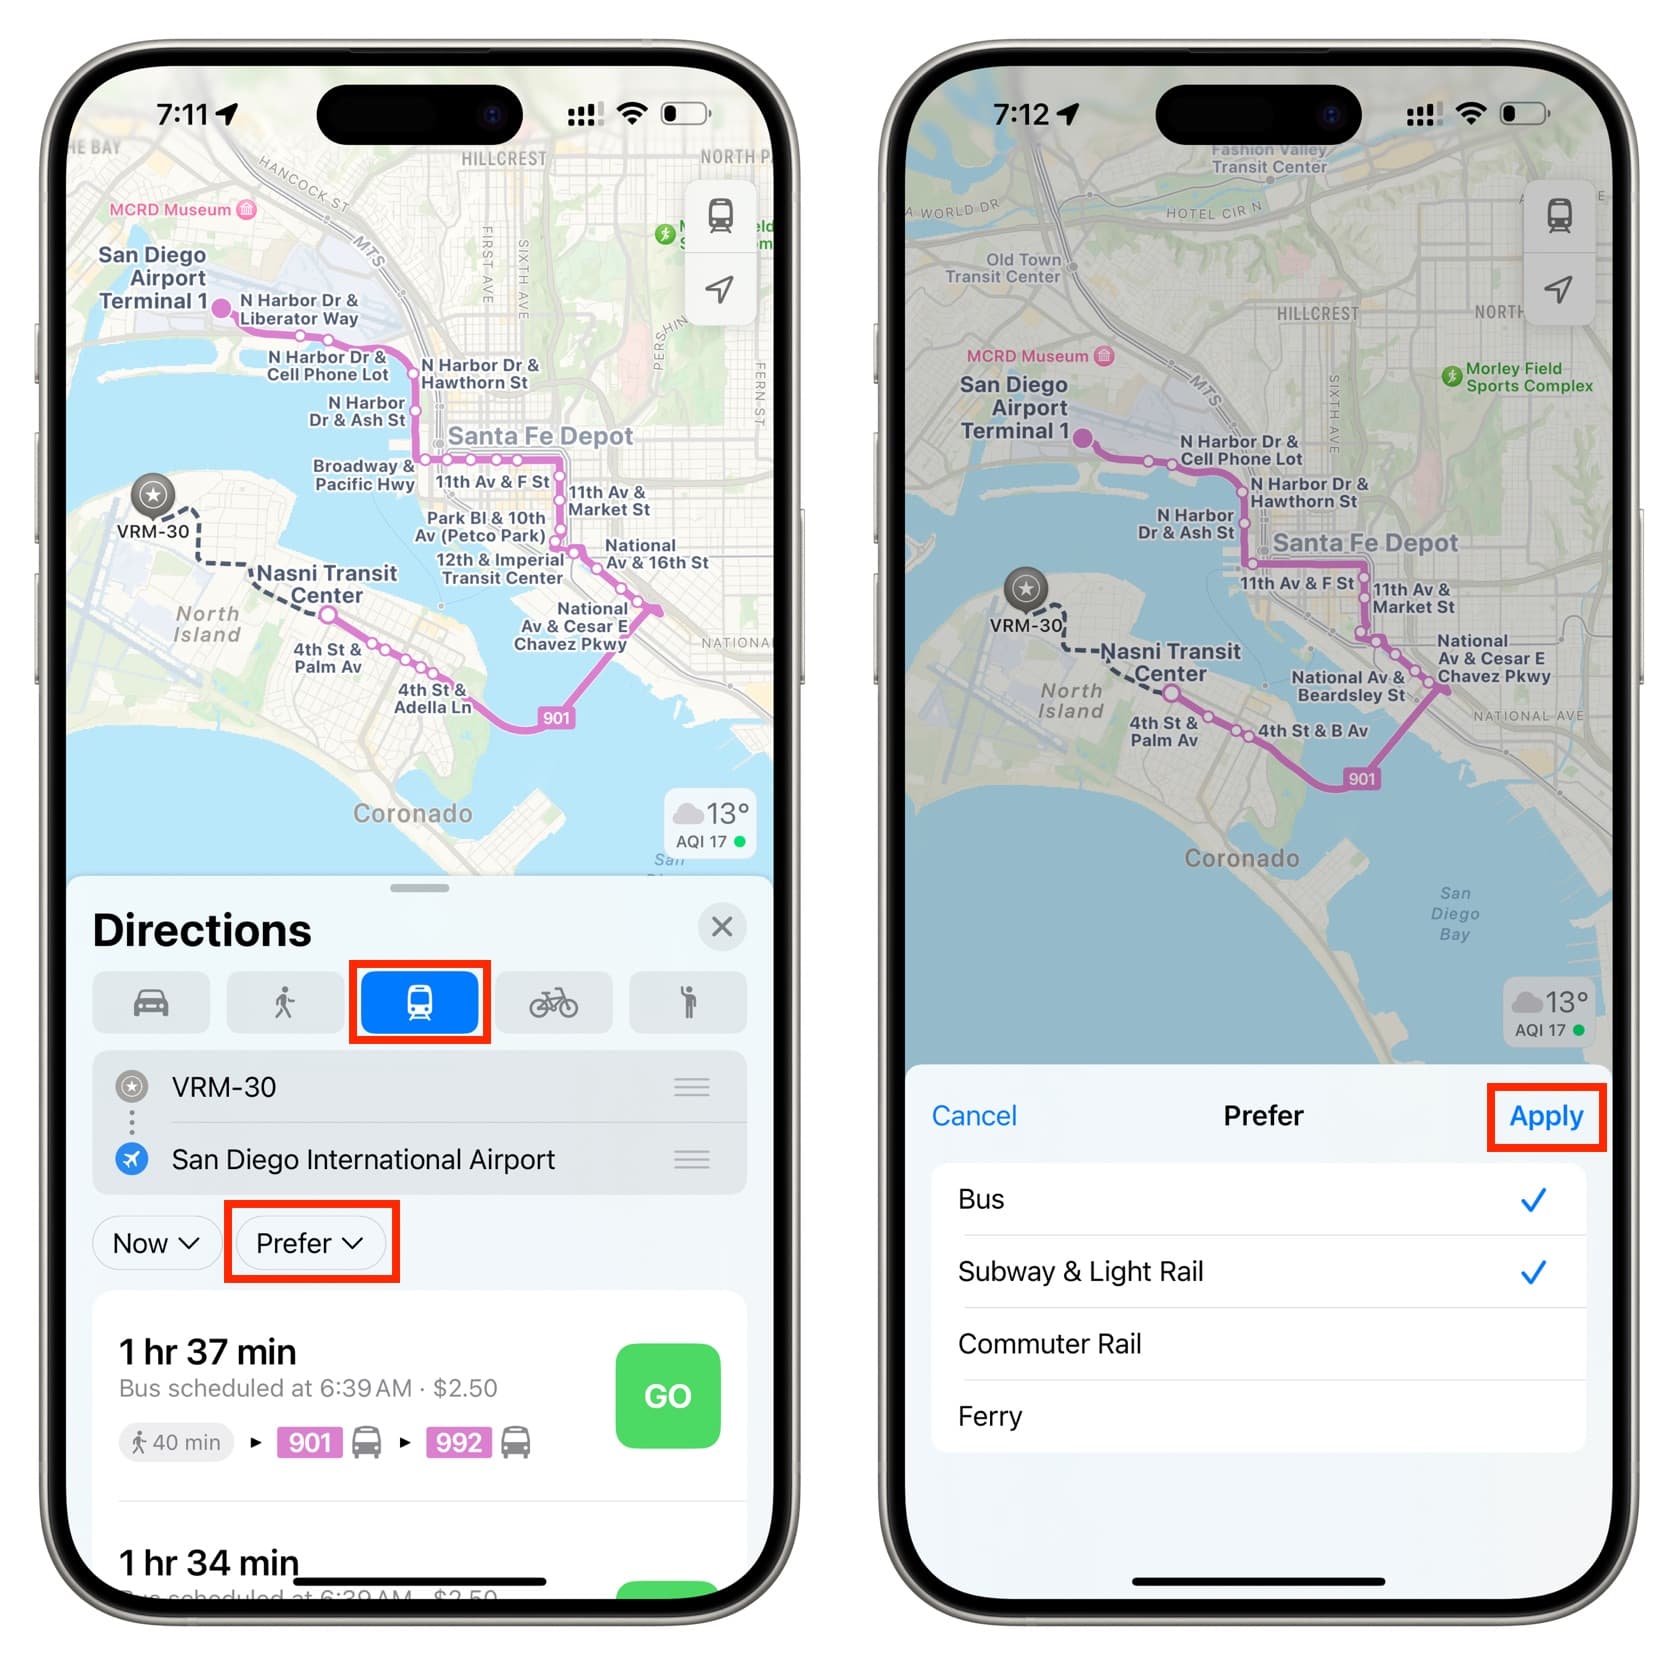 Prefer transit options in Apple Maps on iPhone